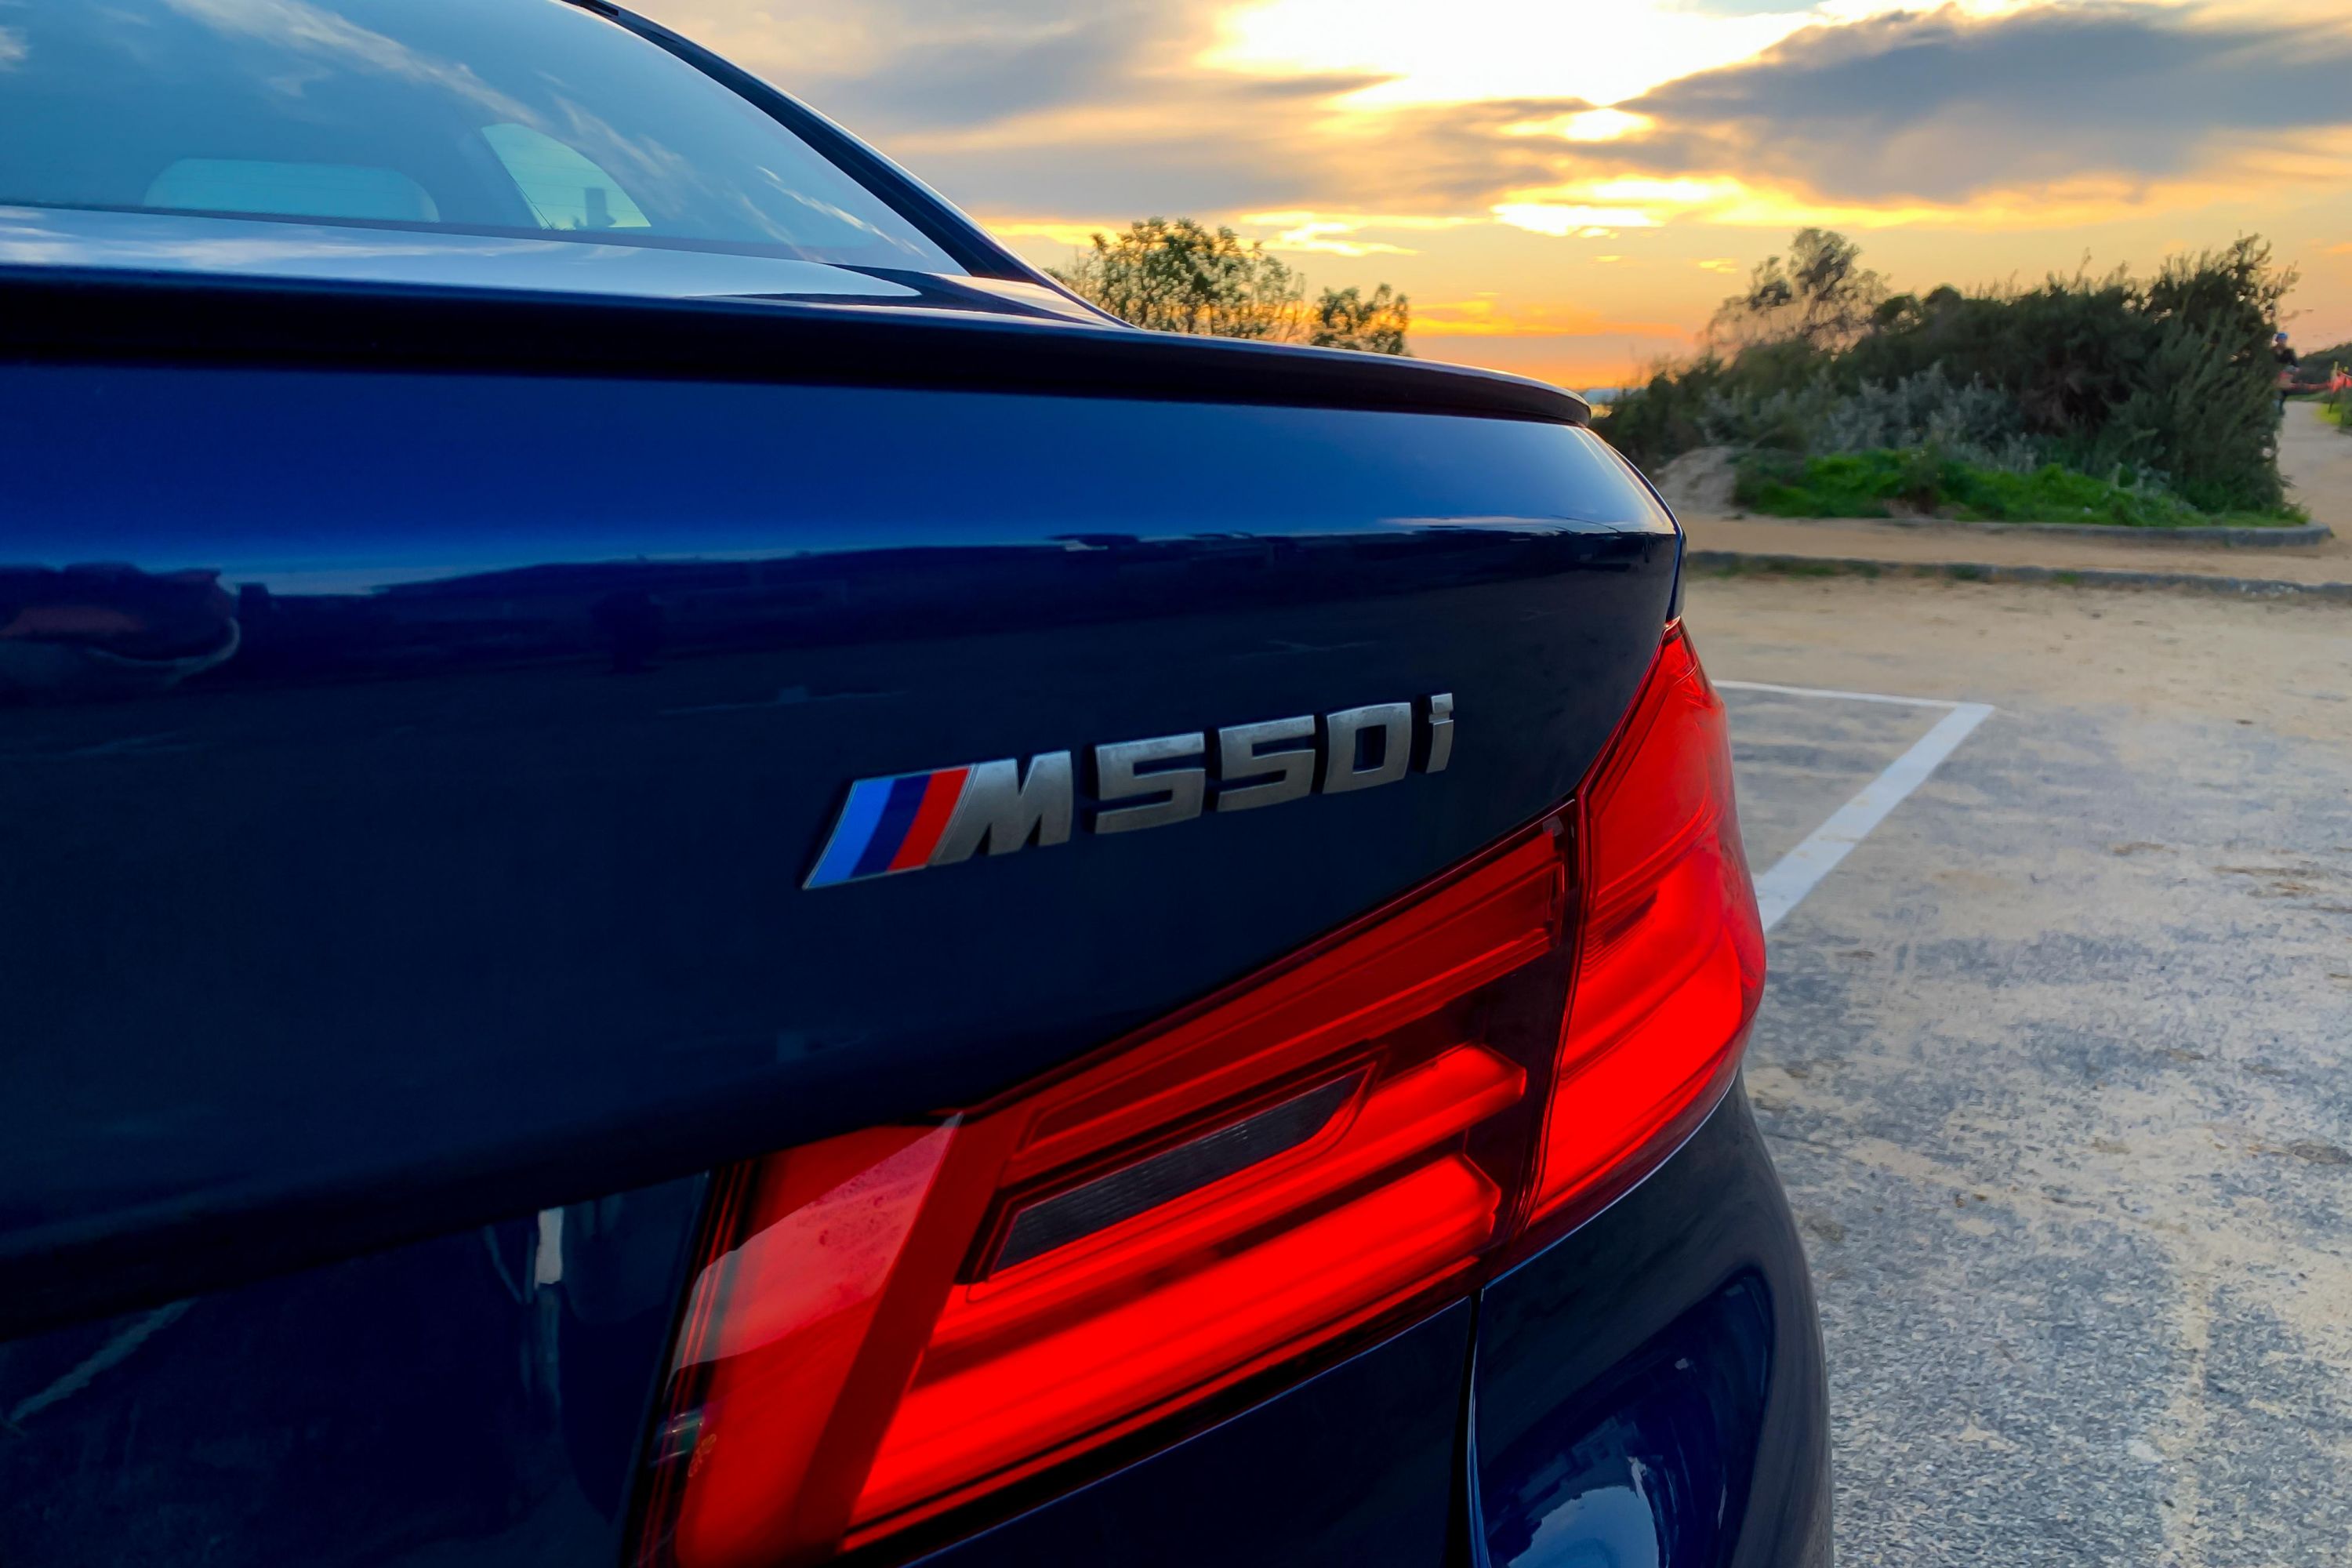 2020 Bmw M550i Xdrive Pure Review Carexpert